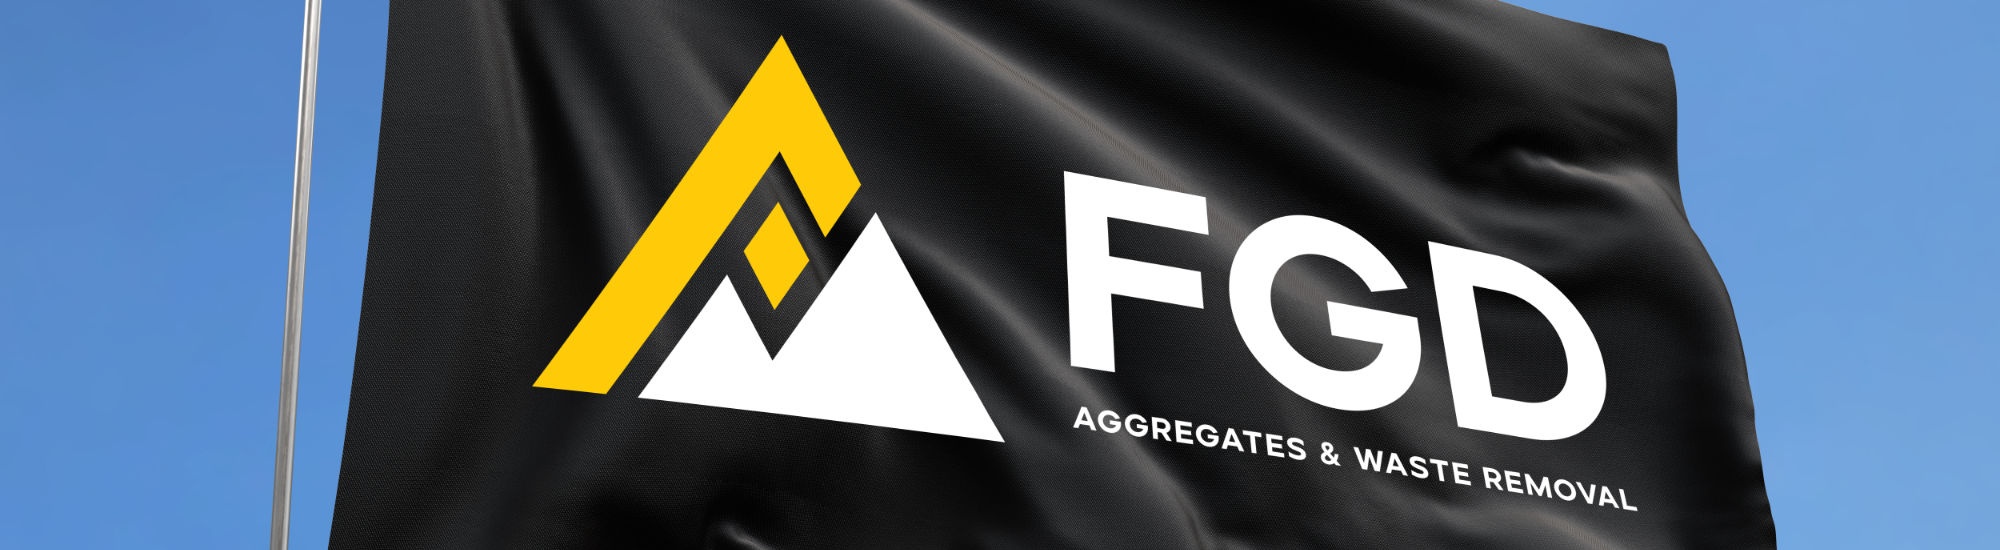 FGD Limited - Aggregates and Waste Removal